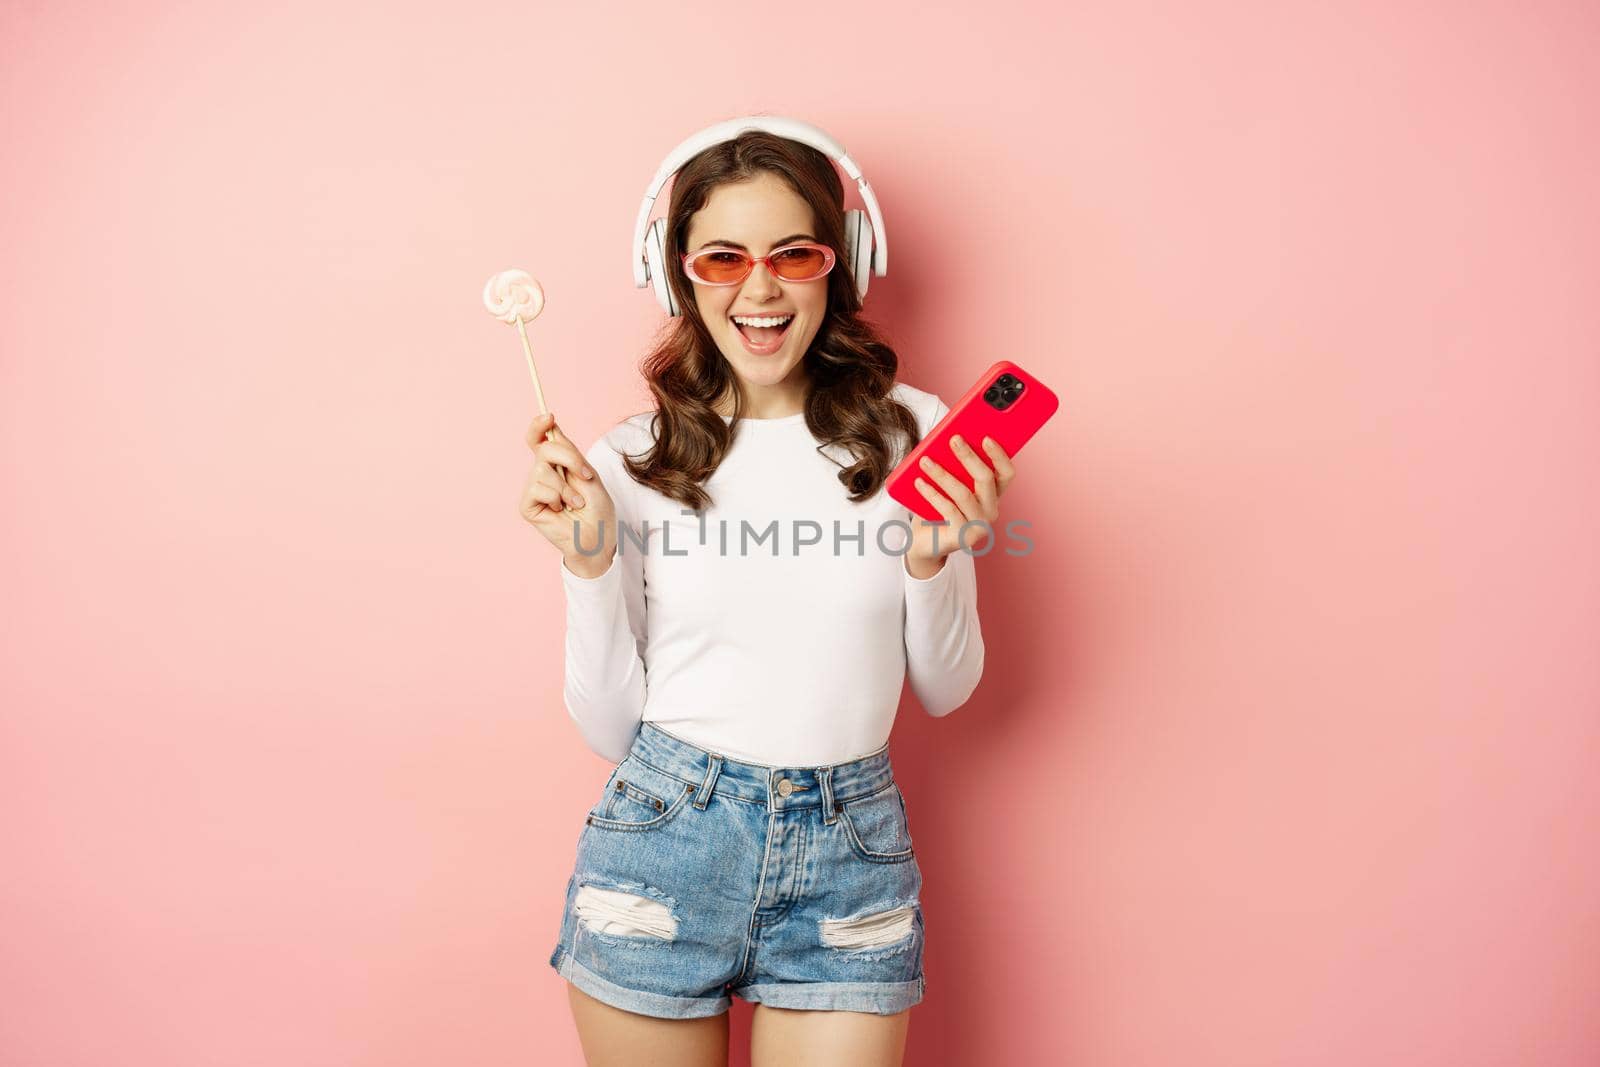 Dancing woman in sunglasses, listening music in headphones, holding lolipop and smartphone, laughing and smiling happy, standing over pink background.